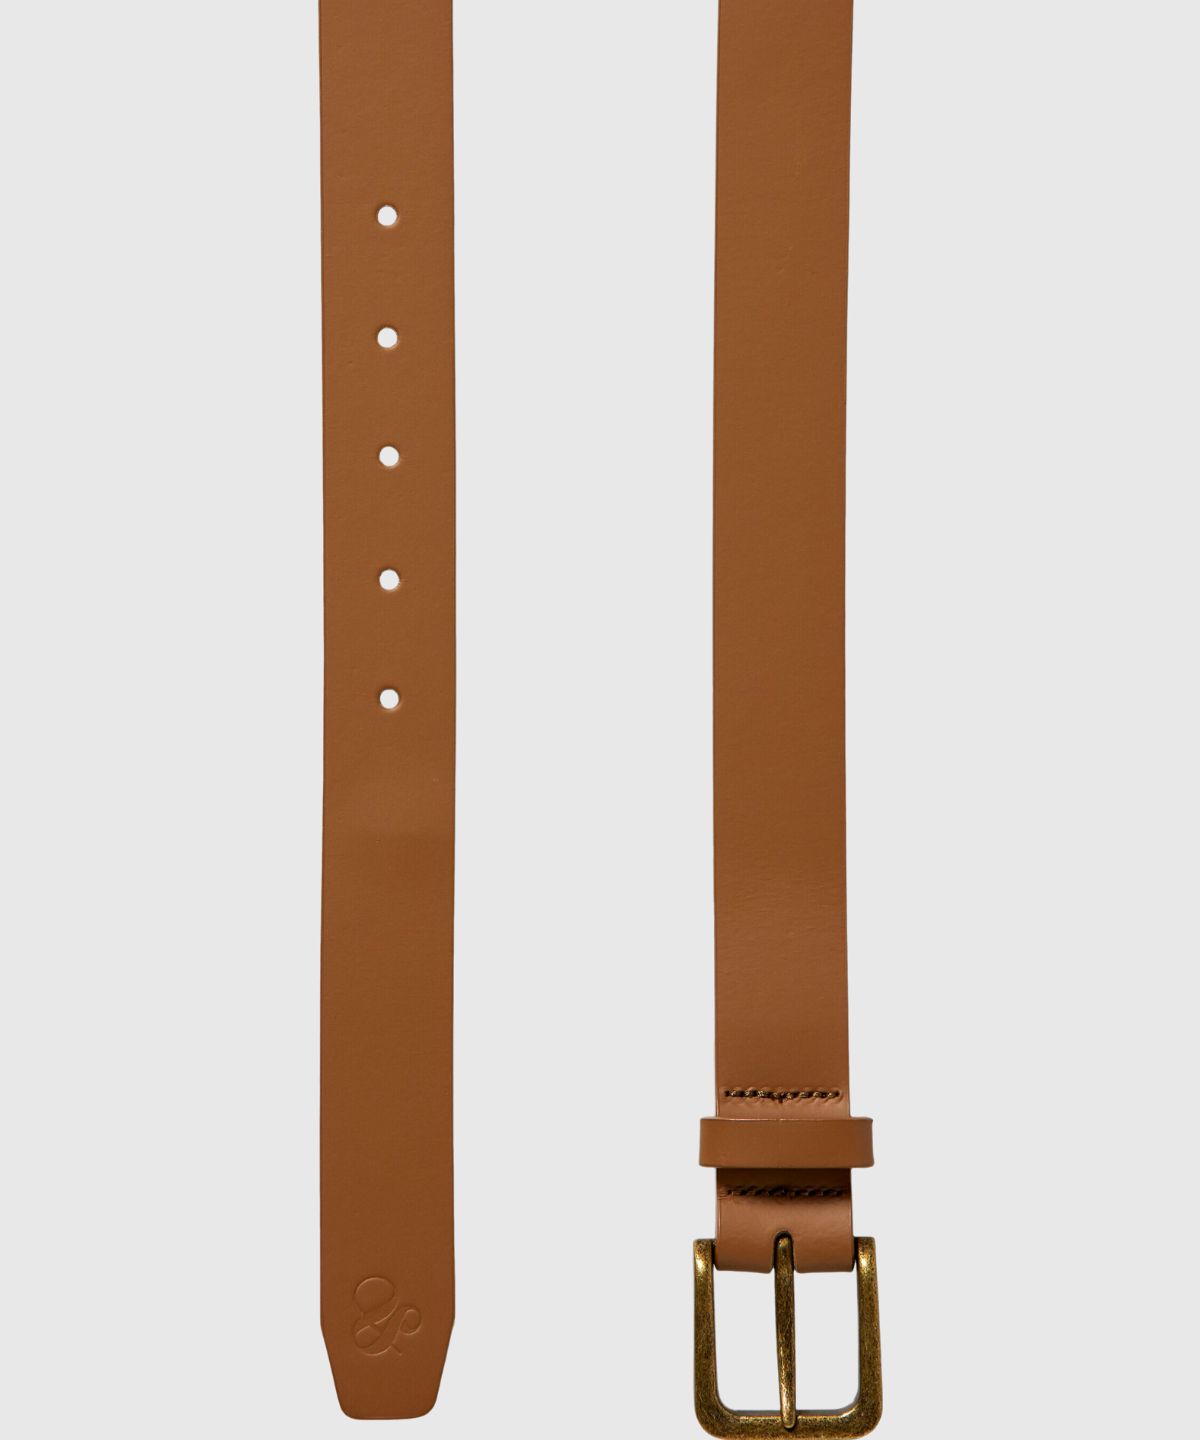 ESSENTIALS Recycled leather belt